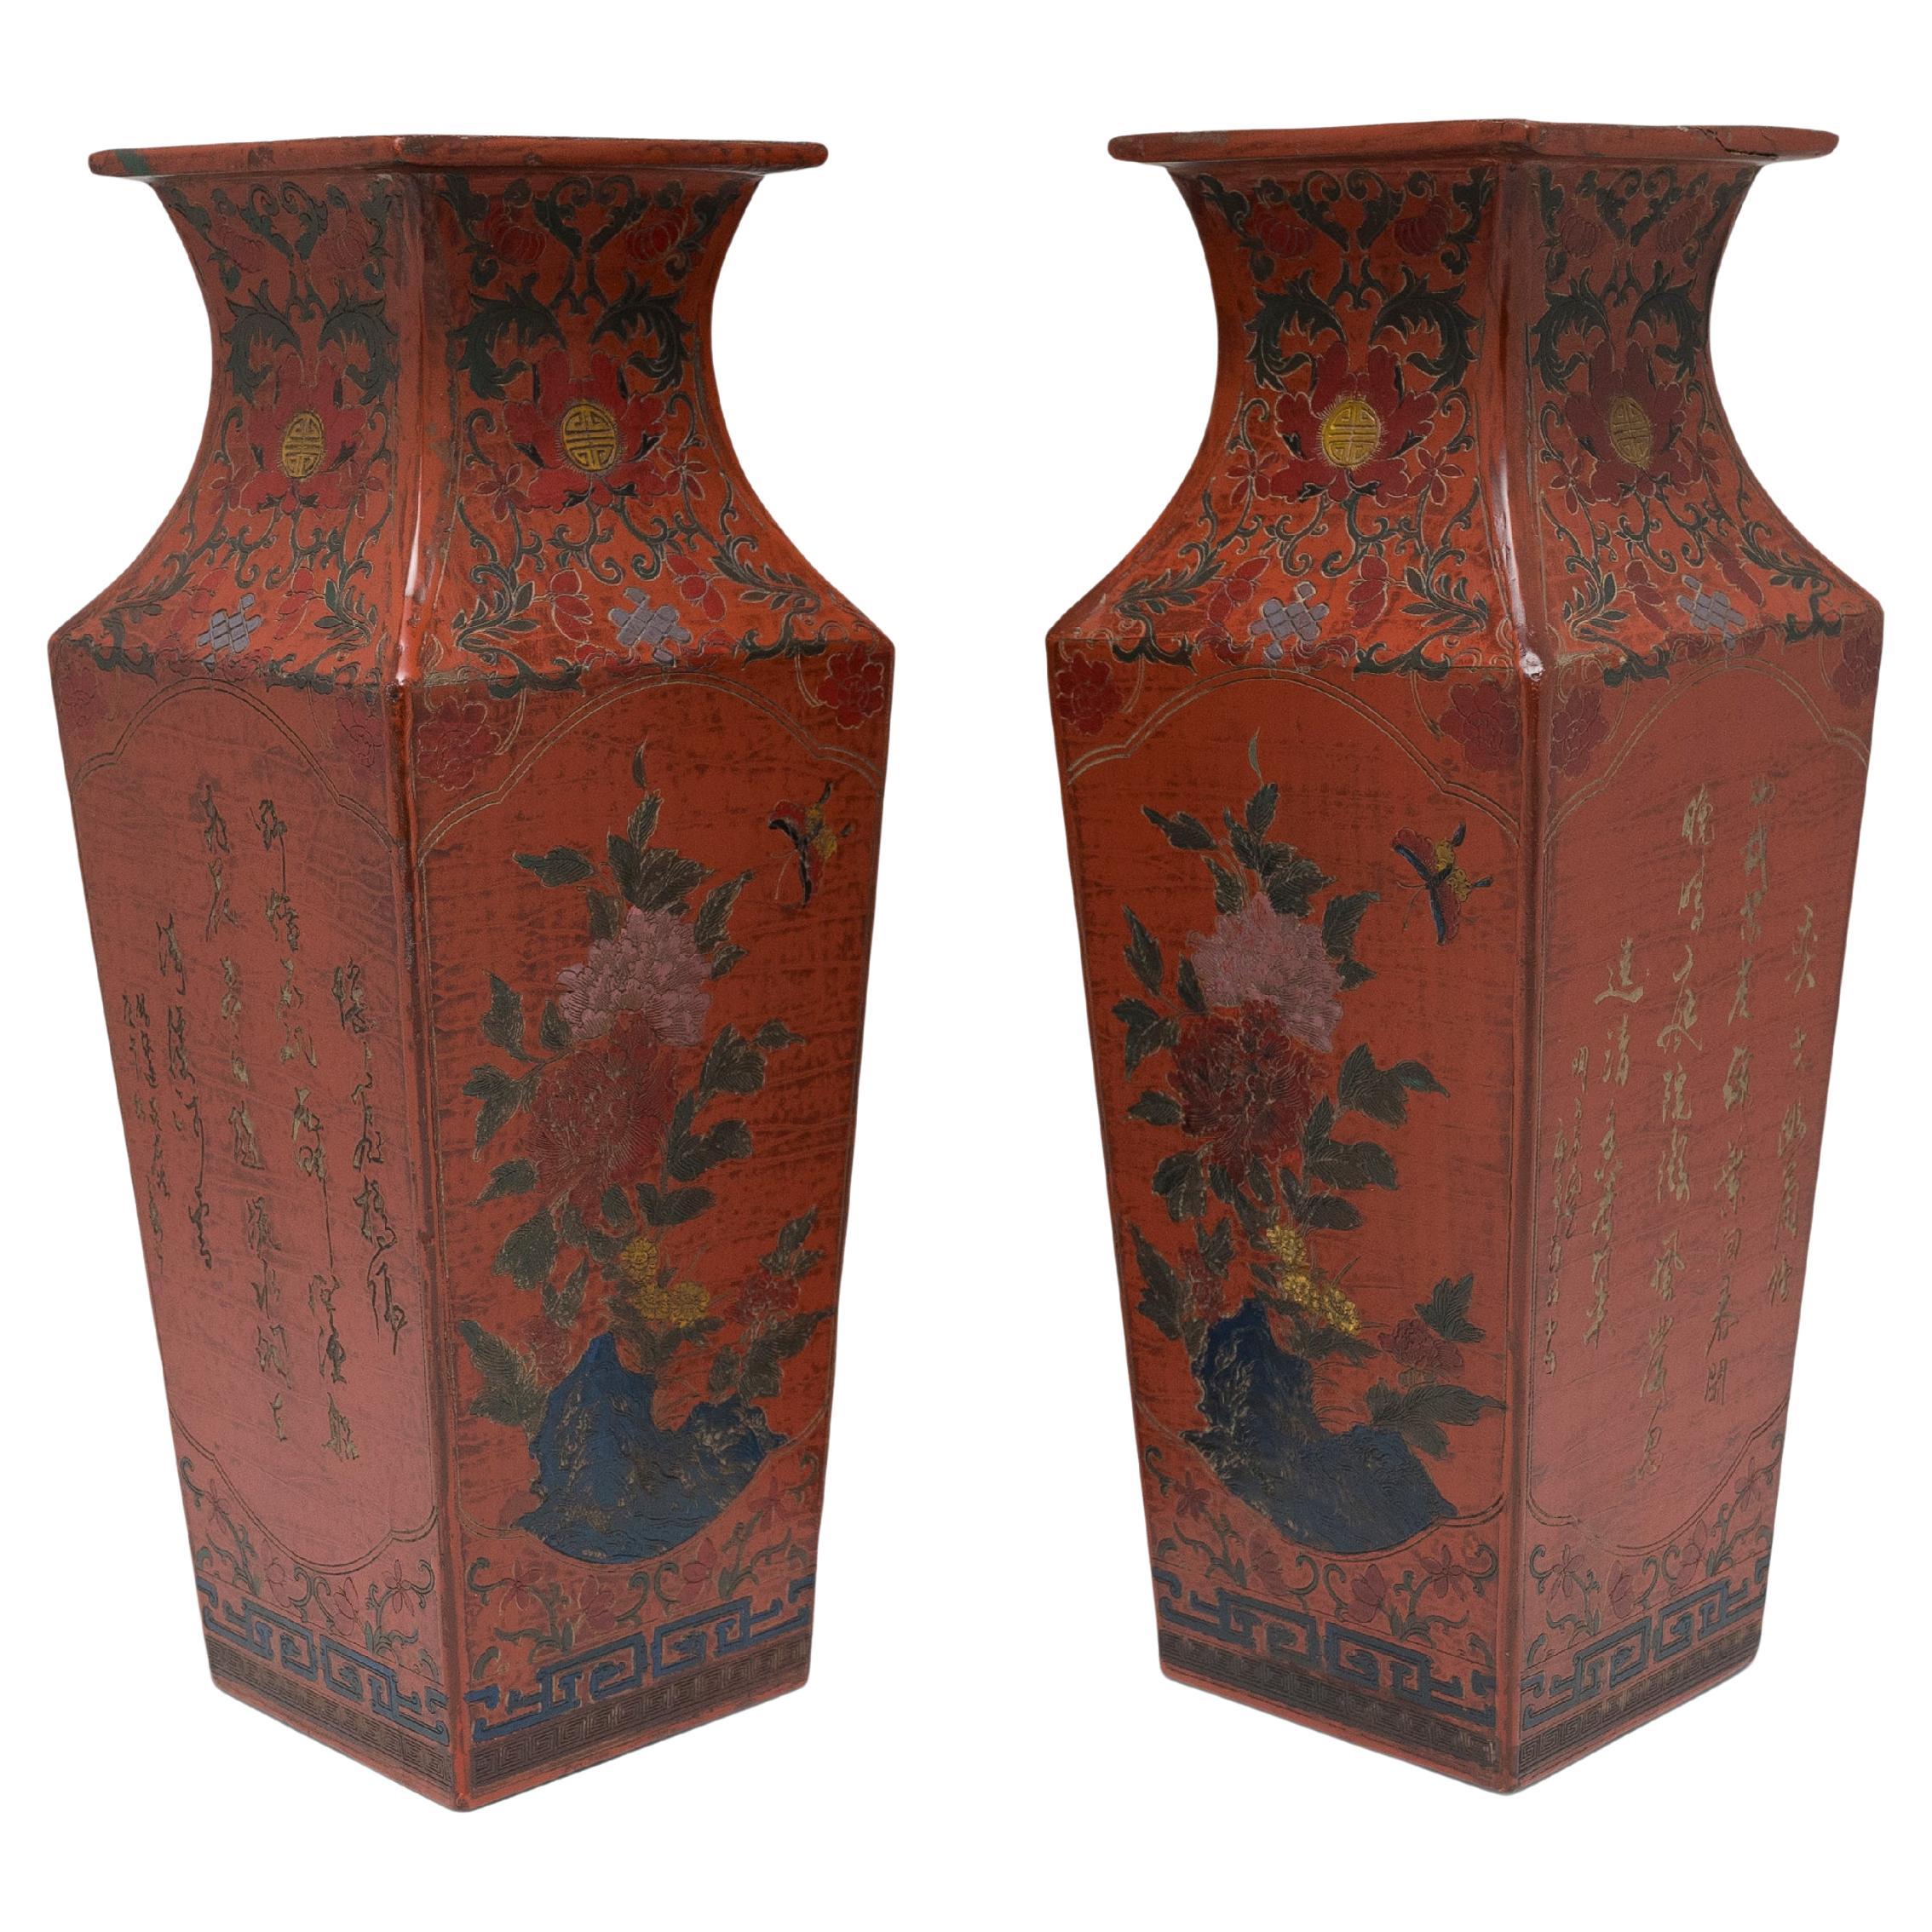 Pair of Chinese Red Lacquer Square Fantail Vases